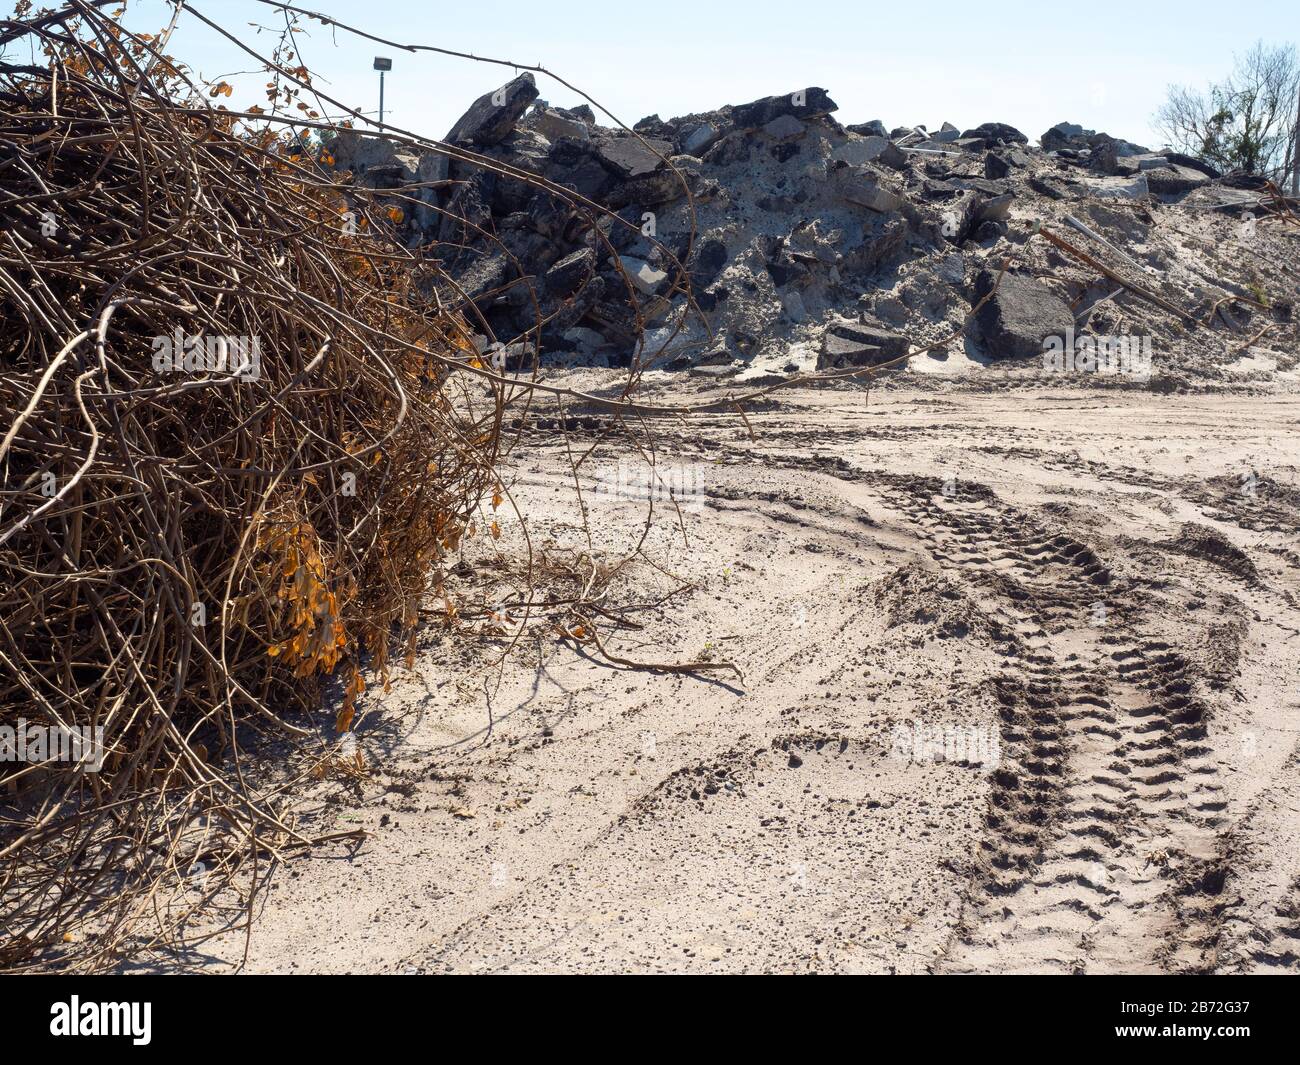 Heavy Equipment Tire Tracks at Road Demolition Site, pile of dead Shrubs, Branches, Roots, in background huge pile of Concrete and Asphalt View #1 Stock Photo